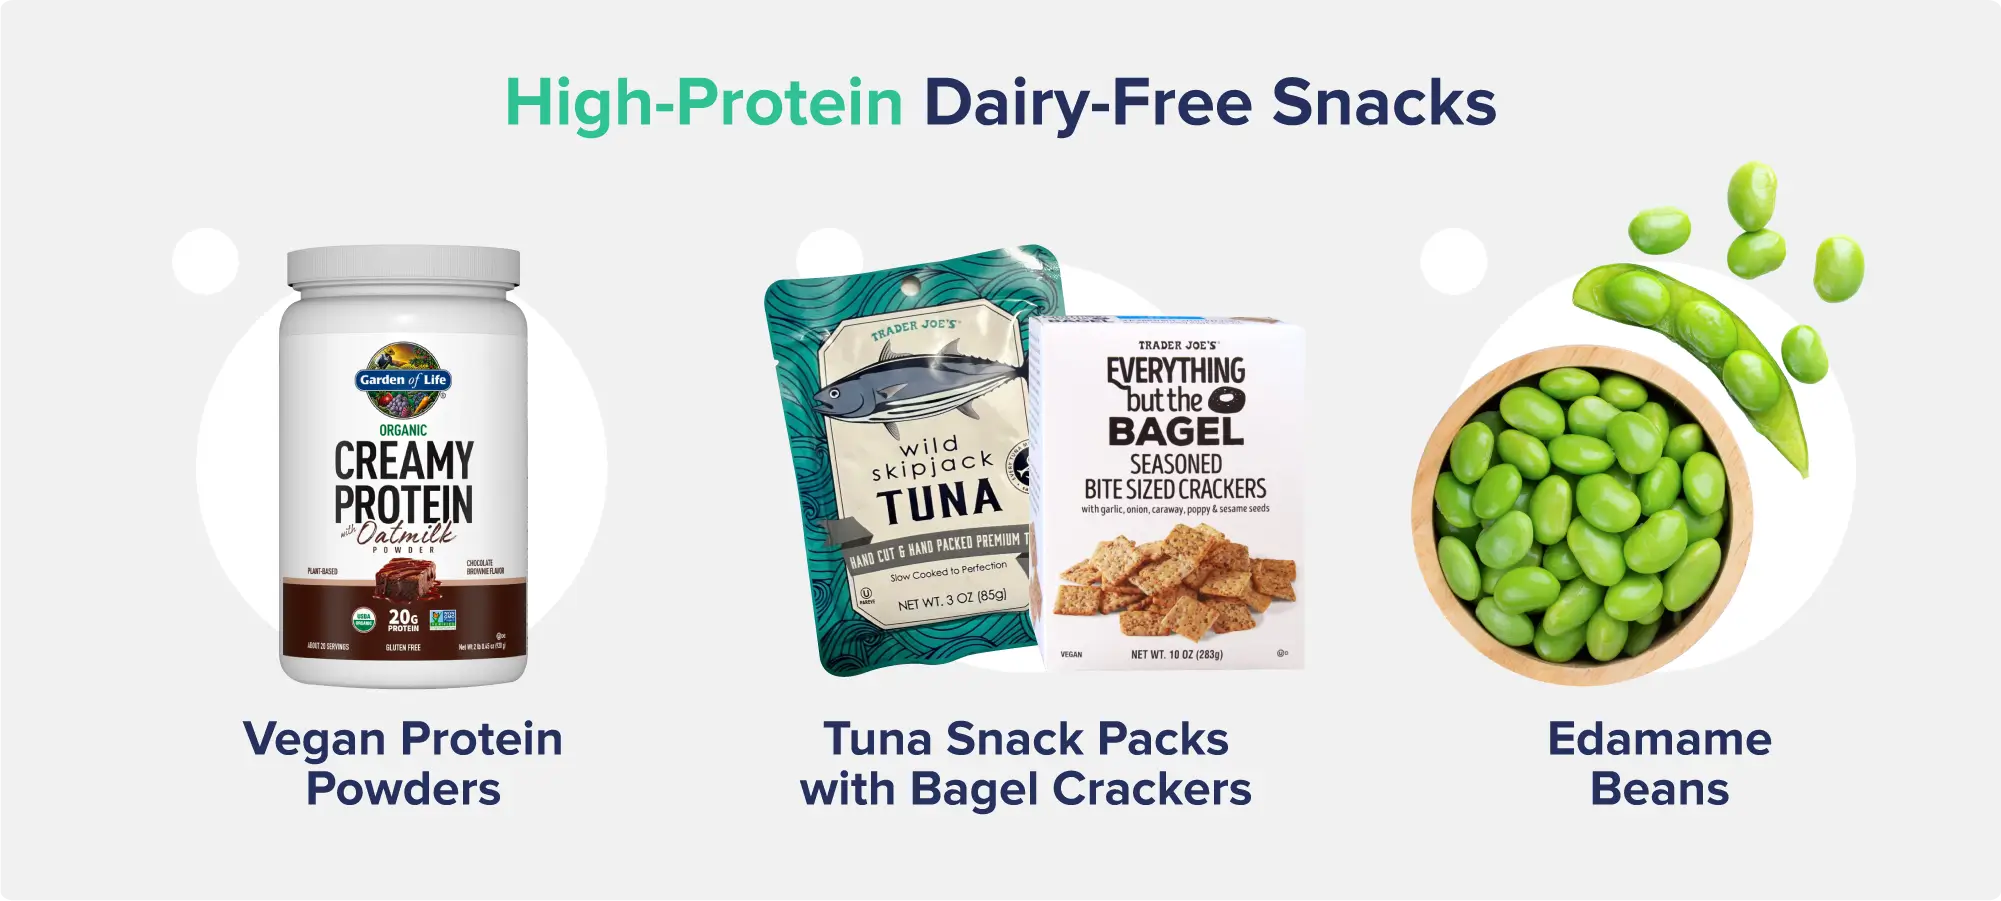 A graphic entitled "High-Protein Dairy-Free Snacks" depicting labeled images of a tub of protein powder, a packet of skipjack tuna next to a box of crackers, and a bowl of edamame beans.